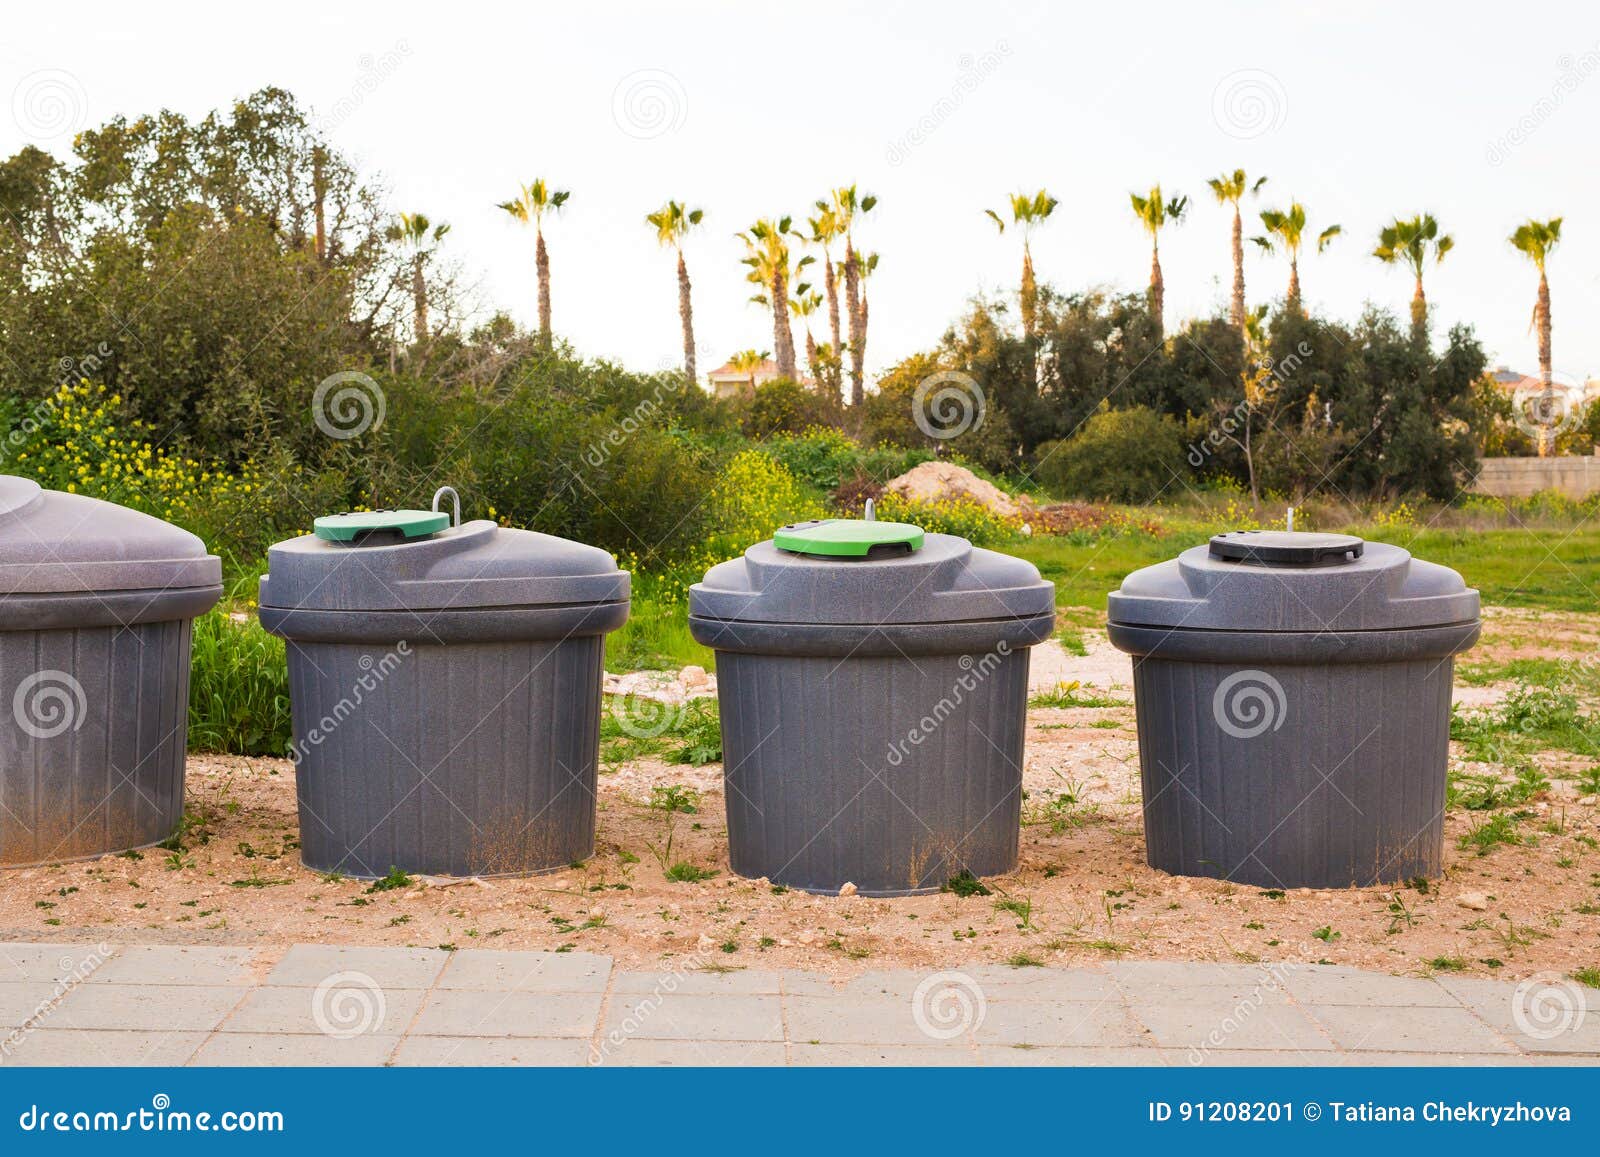 https://thumbs.dreamstime.com/z/city-trash-cans-dumpster-green-overfilled-91208201.jpg